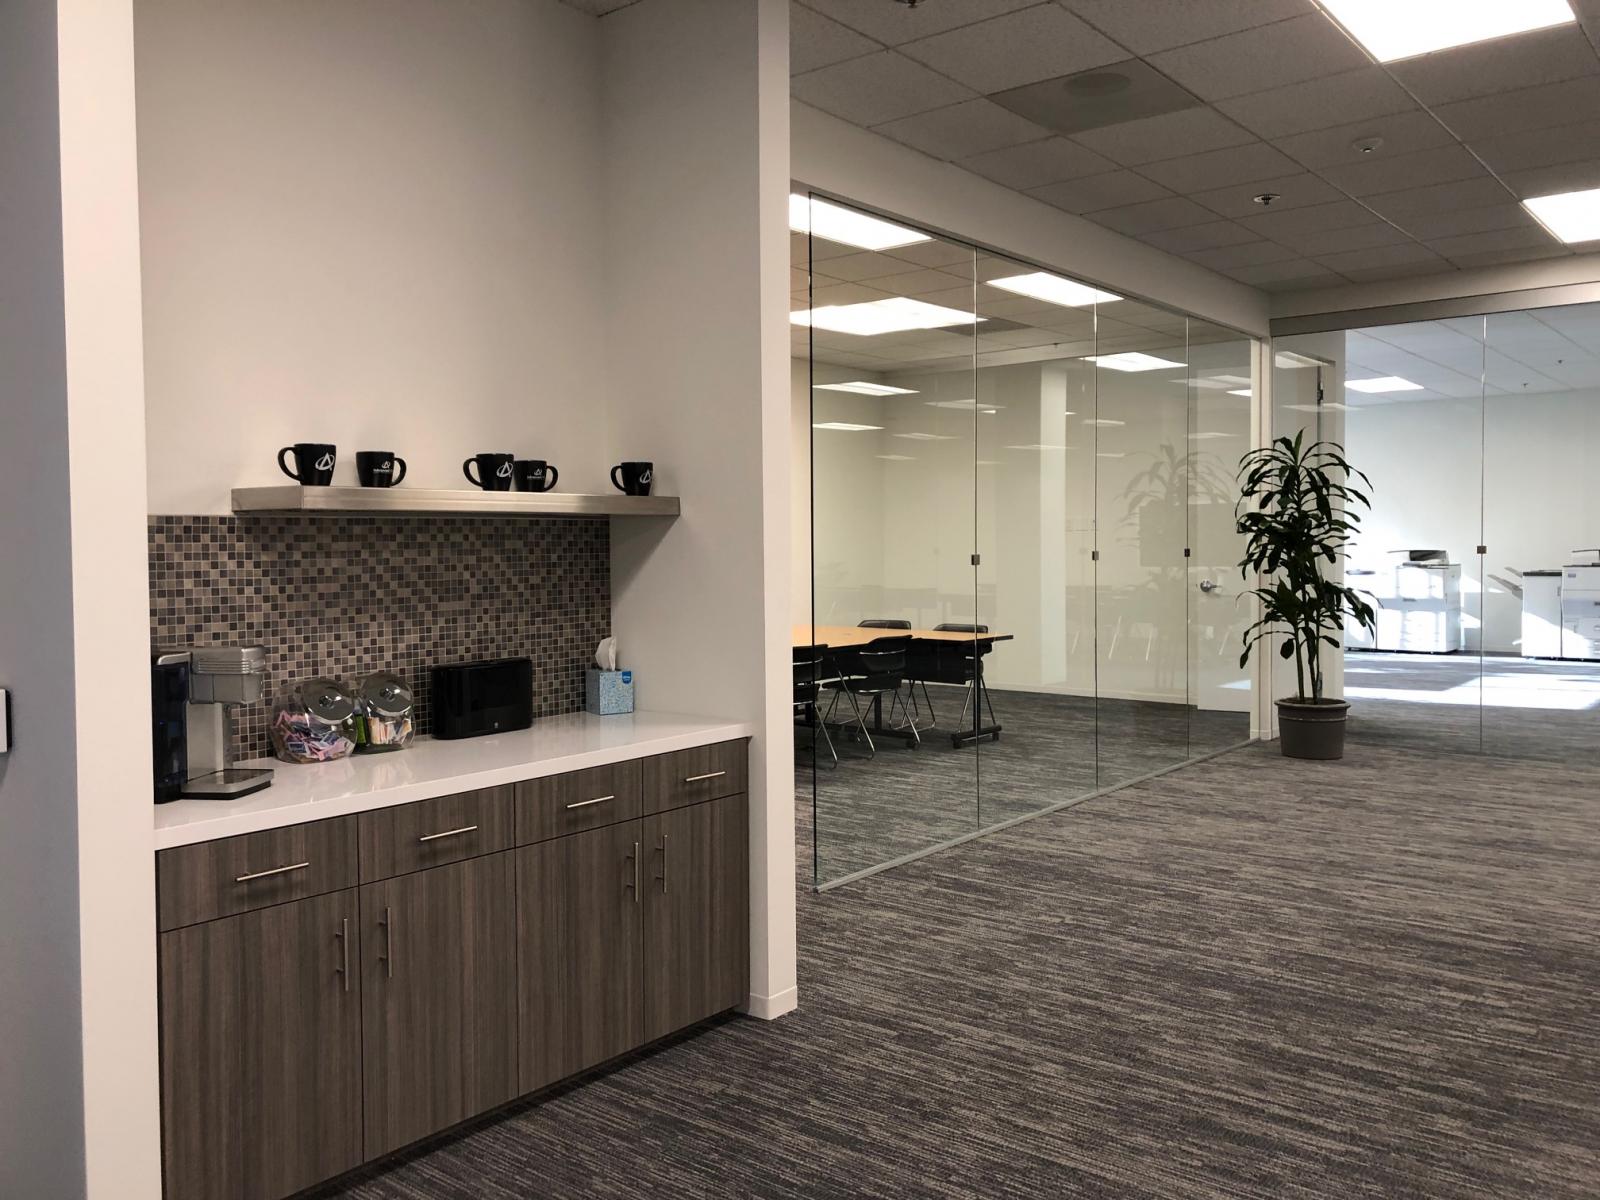 Coffee area leading to 2 conference rooms.